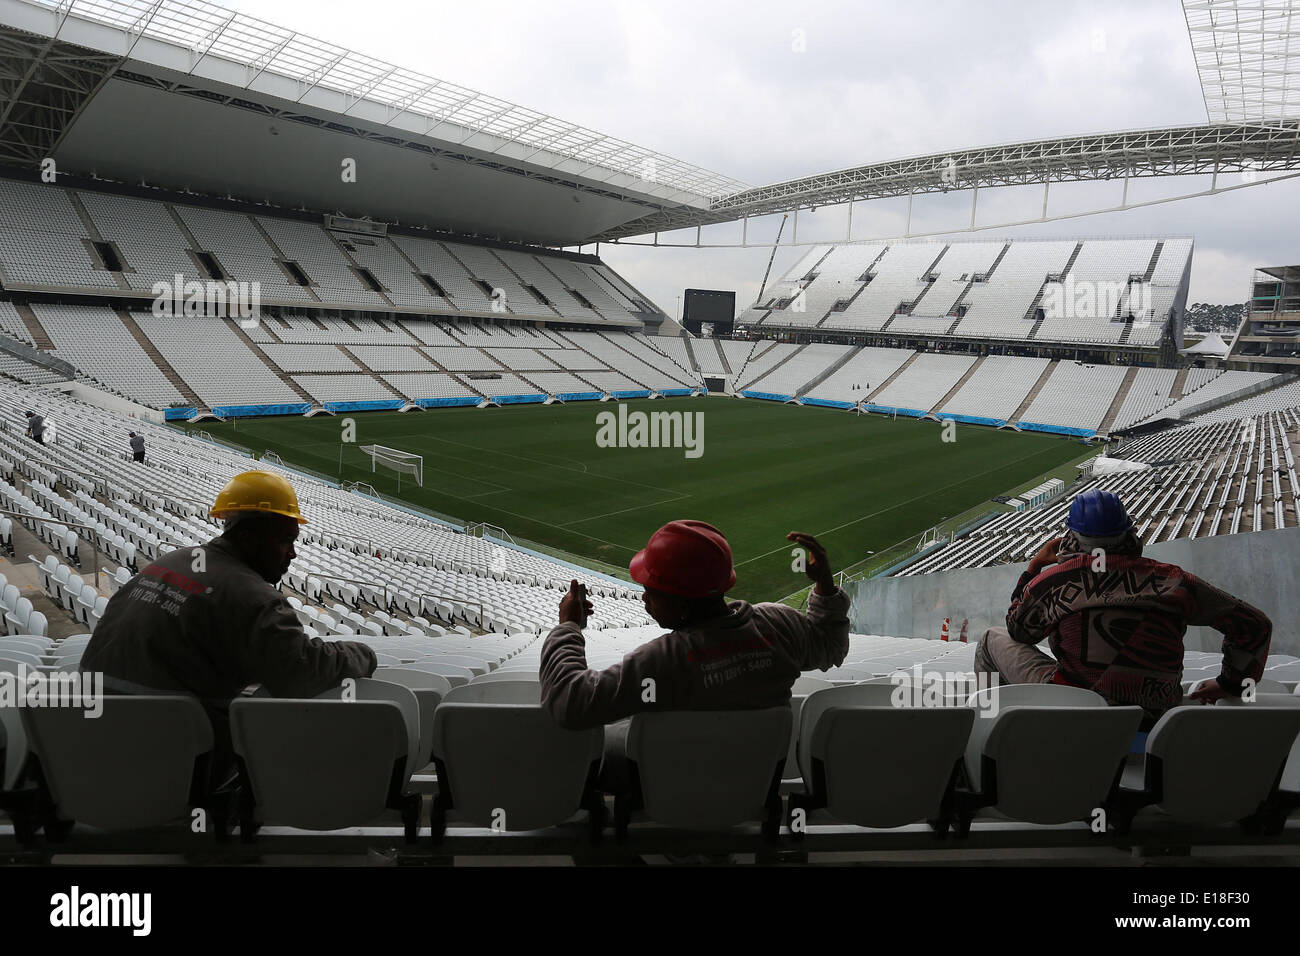 Sao Paulo, Brazil. 26th May, 2014. Workers are seen inside the Sao Paulo Arena, in Sao Paulo city, Brazil, on May 26, 2014. The stadium also known as Corinthians Arena, will be the seat of the opening match of theBrazil 2014 FIFA World Cup on June 12. © Rahel Patrasso/Xinhua/Alamy Live News Stock Photo